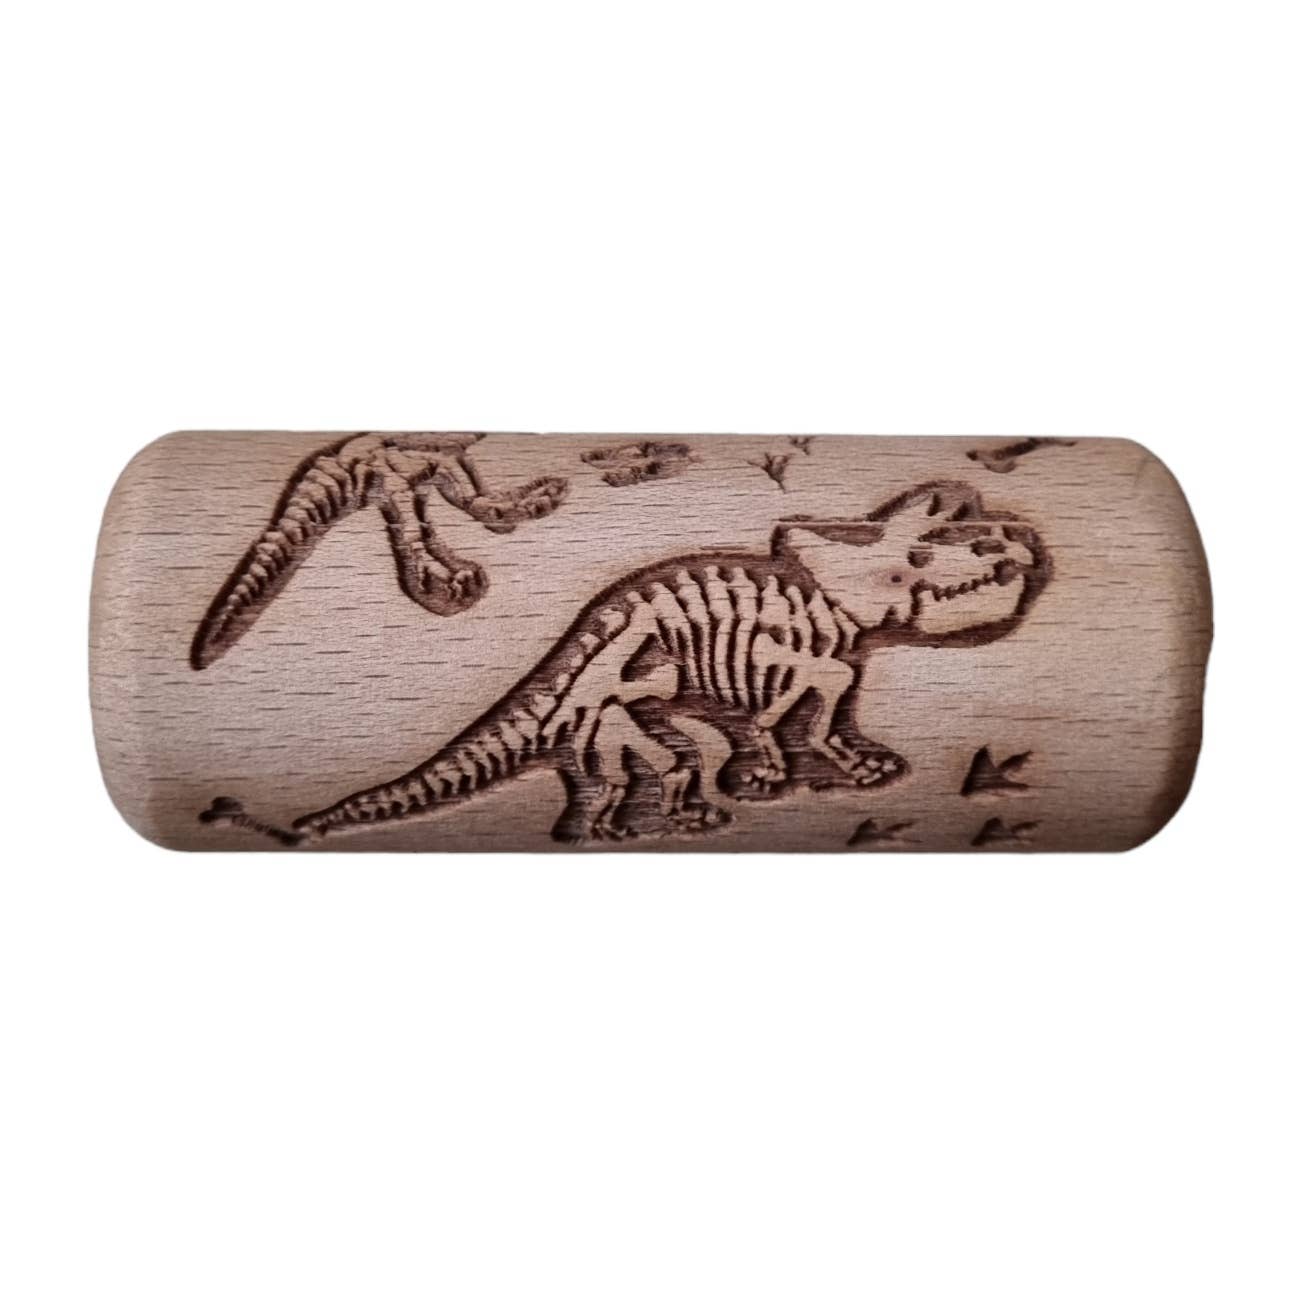 Small Dino Wooden Roller, Made of high-quality wood, this Small Dino Wooden Roller is sturdy and durable, ensuring endless hours of creative play for children of all ages. The embossed design creates texture that adds a unique touch to clay and playdough creations, making it a must-have tool for young artists and crafters.The Small Dino Wooden Roller is compact and easy to use, making it perfect for preschoolers and toddlers who are still developing their fine motor skills.So why wait? Add the Small Dino Wo